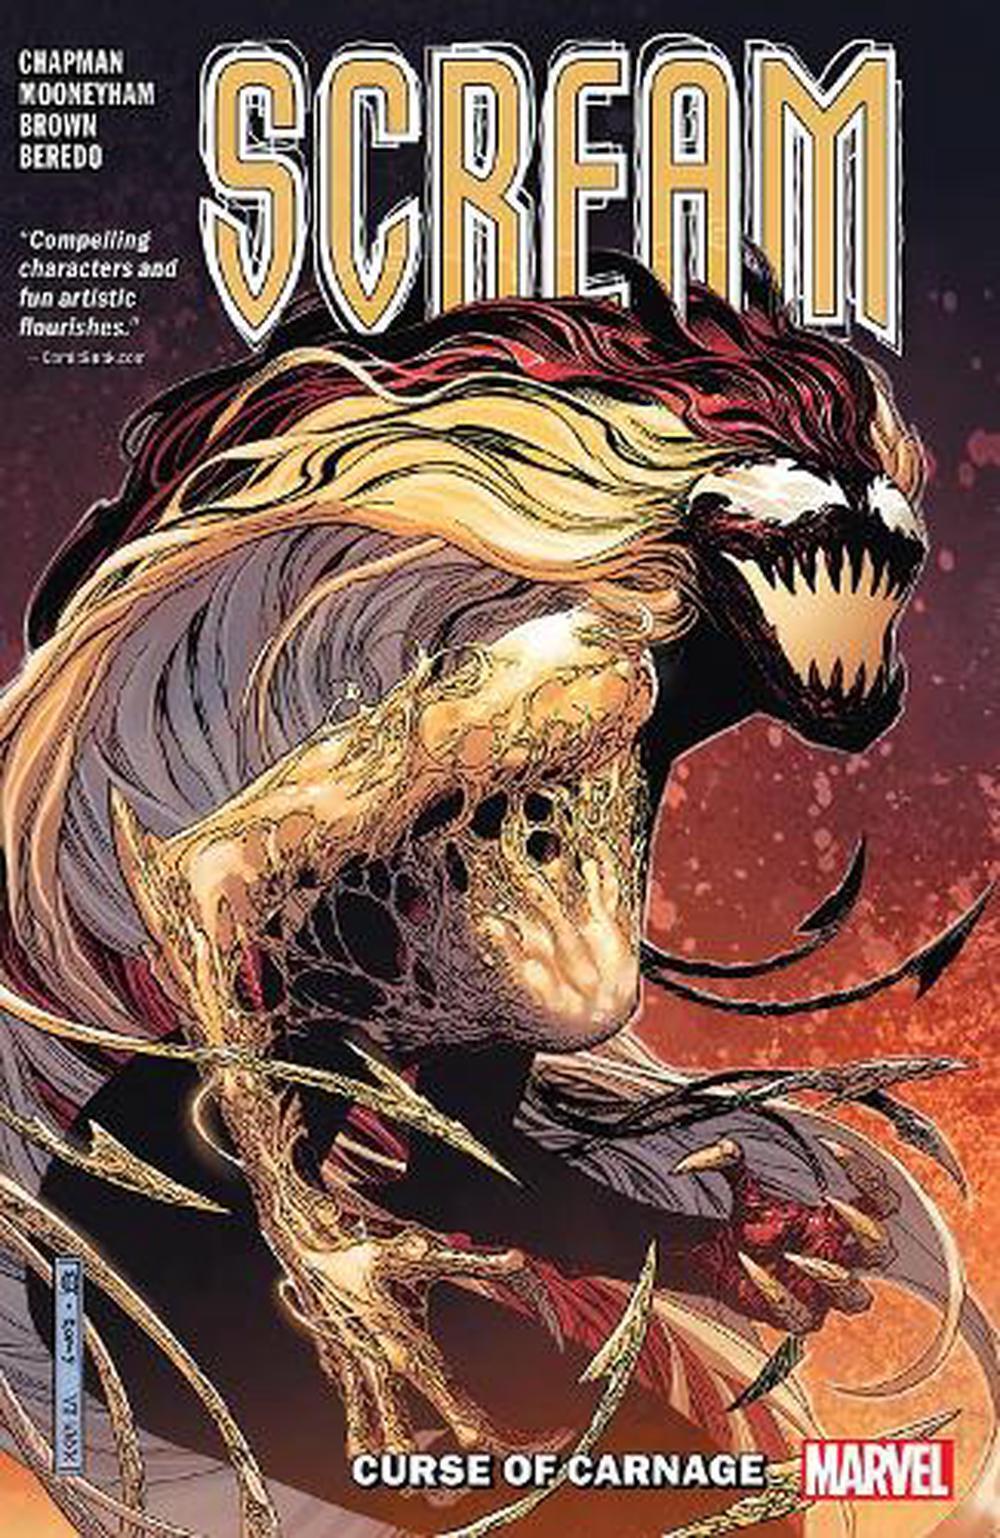 Scream: Curse Of Carnage Vol. 1 by Clay McLeod Chapman (English) Paperback Book